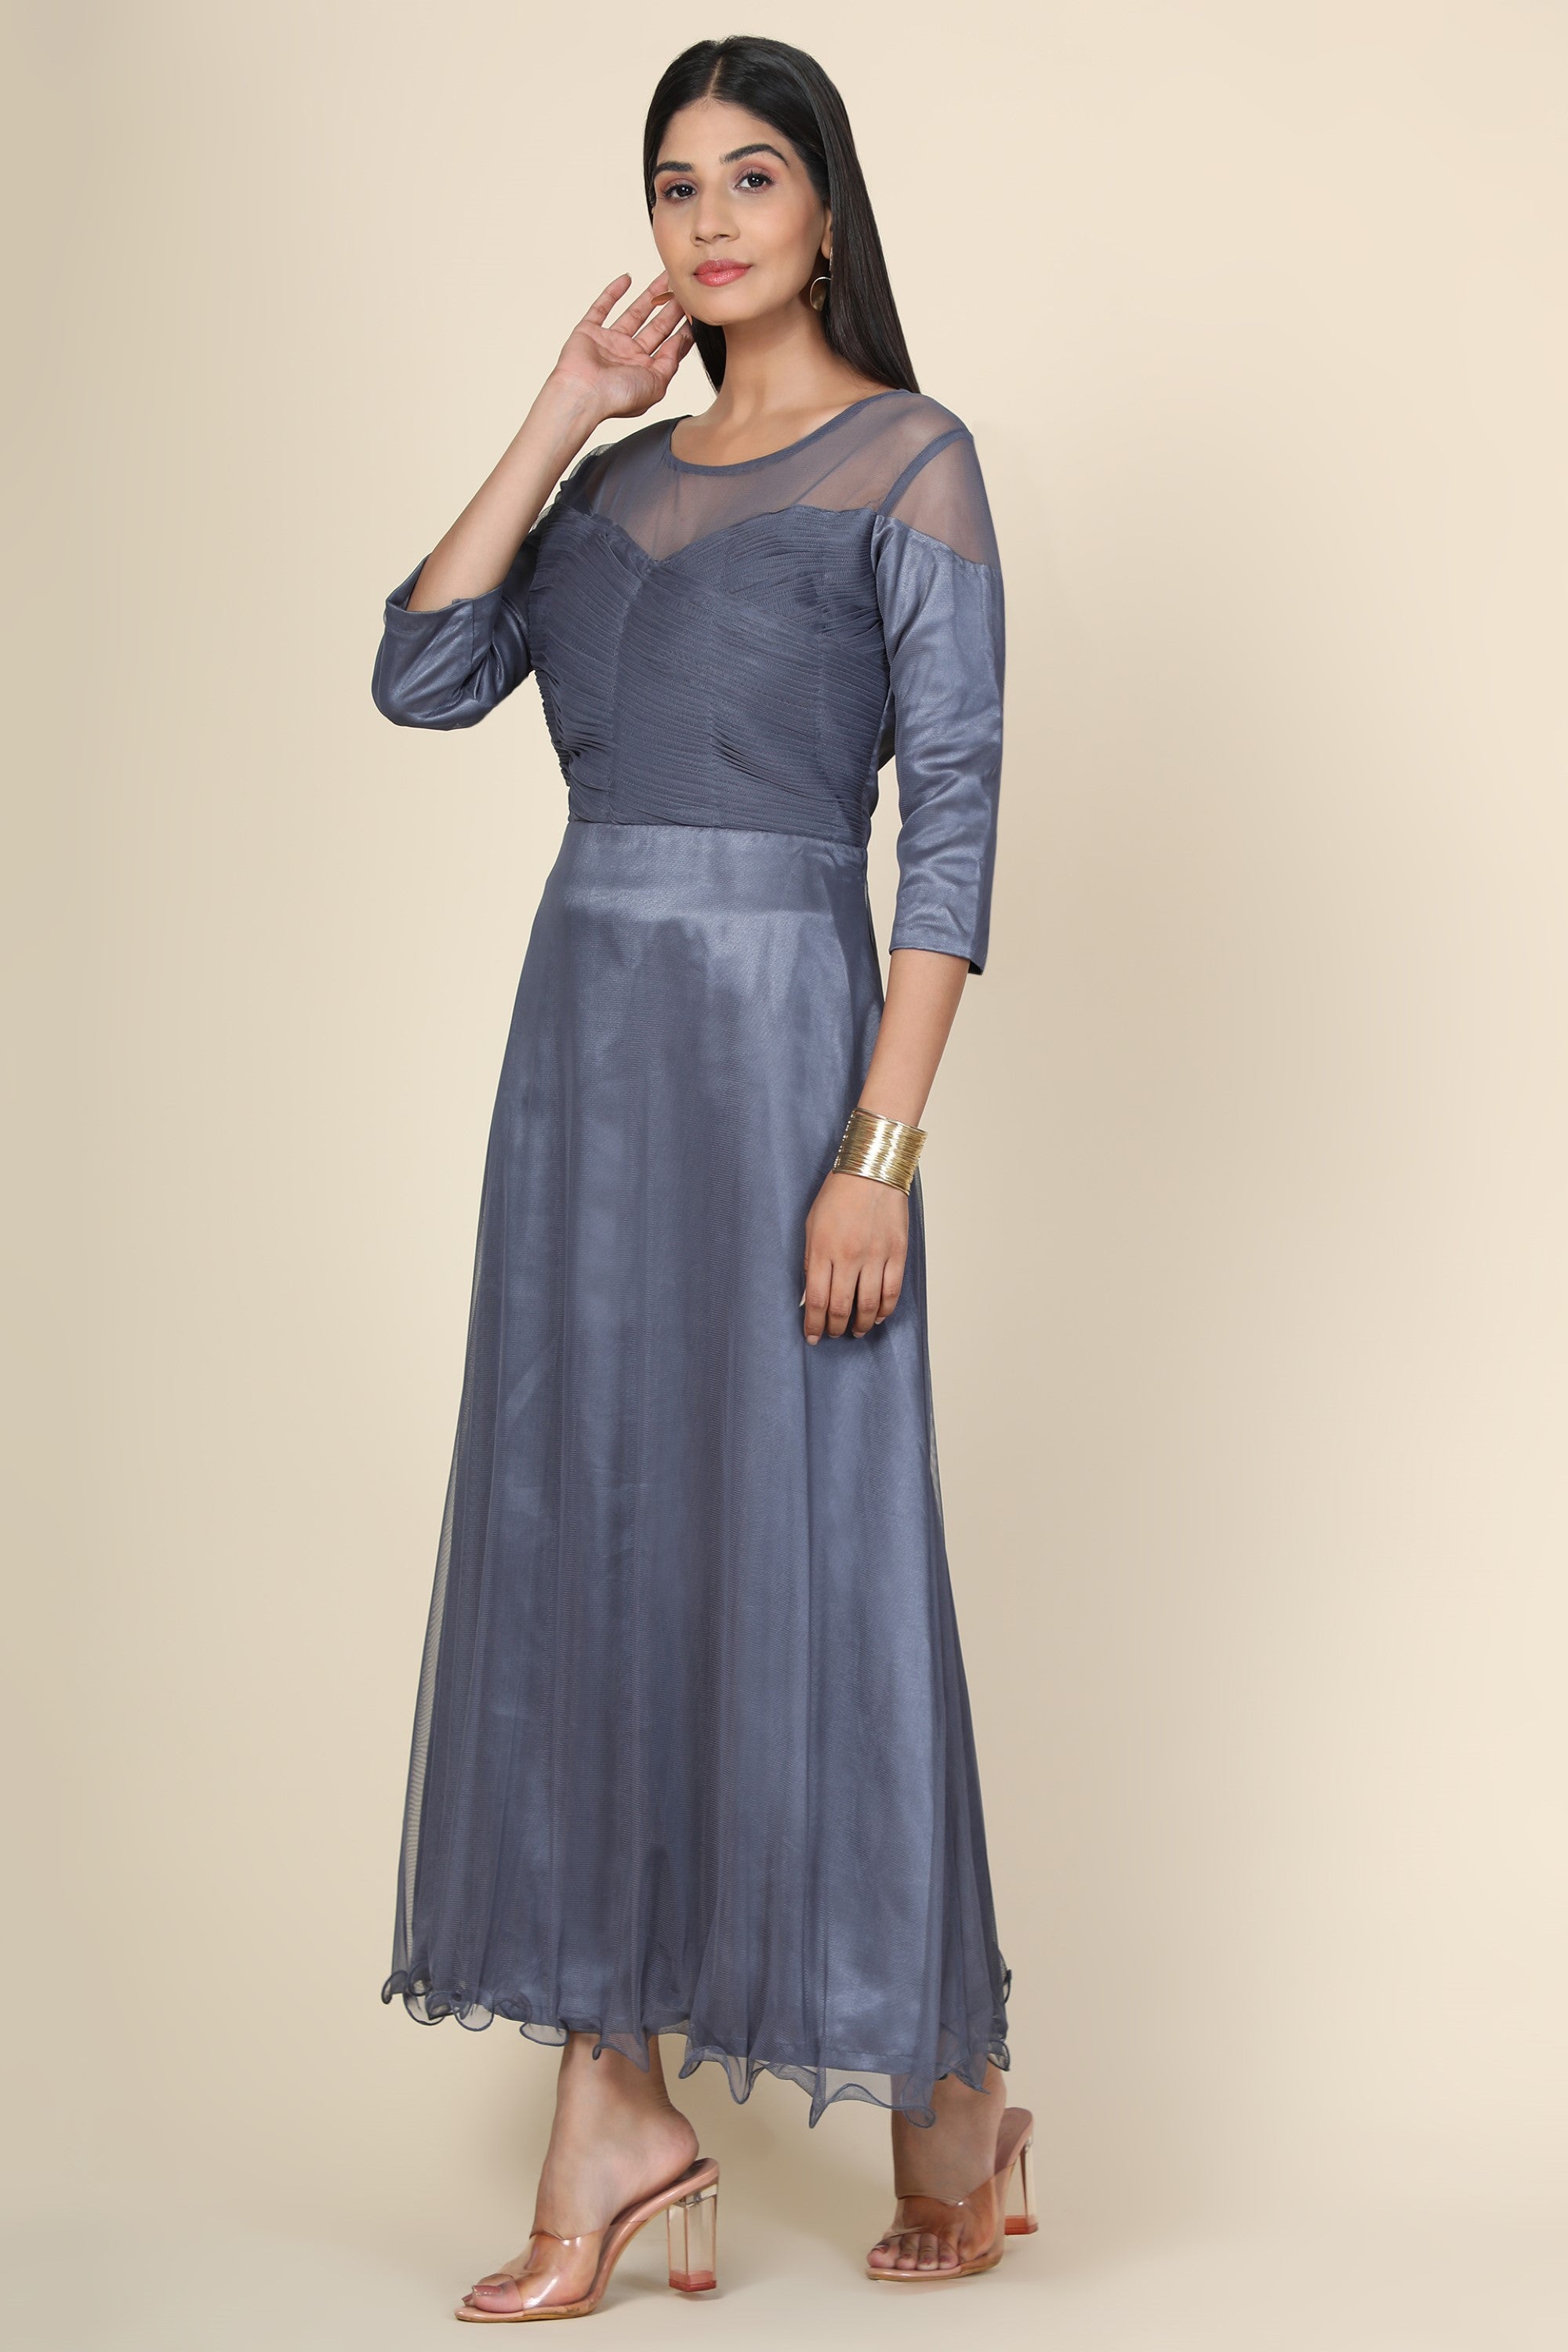 Women's Pleat Draped Grey Gown - MIRACOLOS by Ruchi